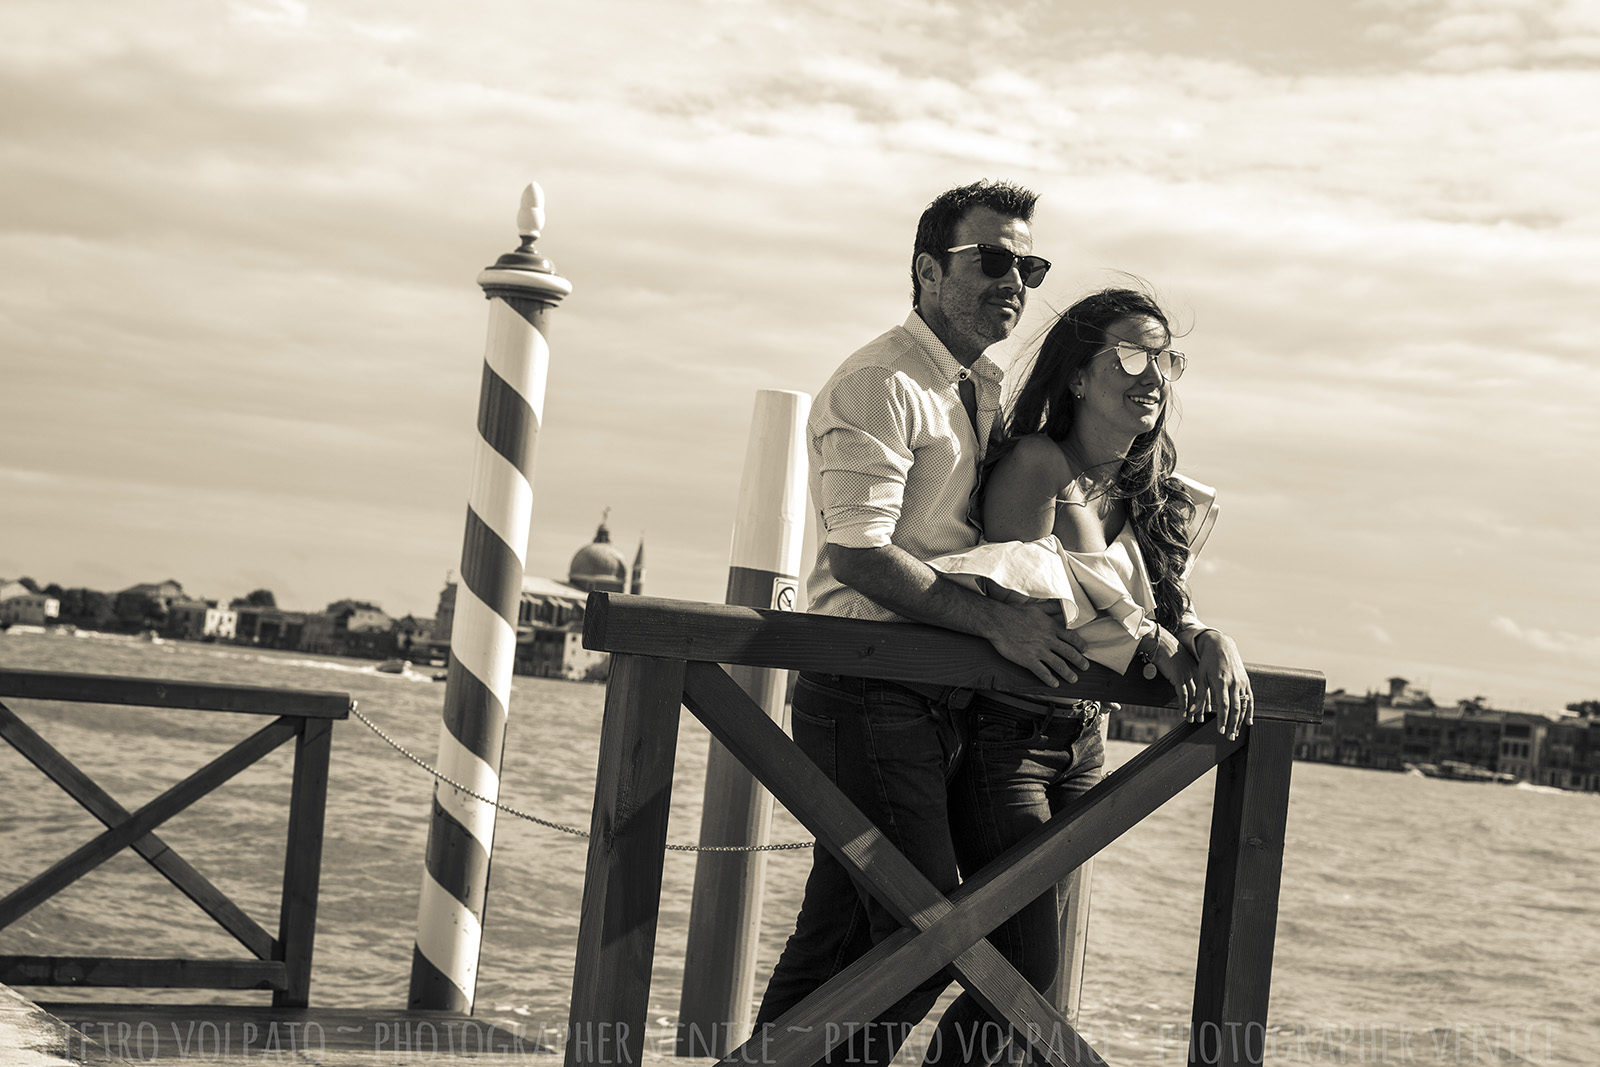 Photographer in Venice Italy for honeymoon photography session ~ Couple vacation photo walk in Venice ~ Romantic and fun pictures